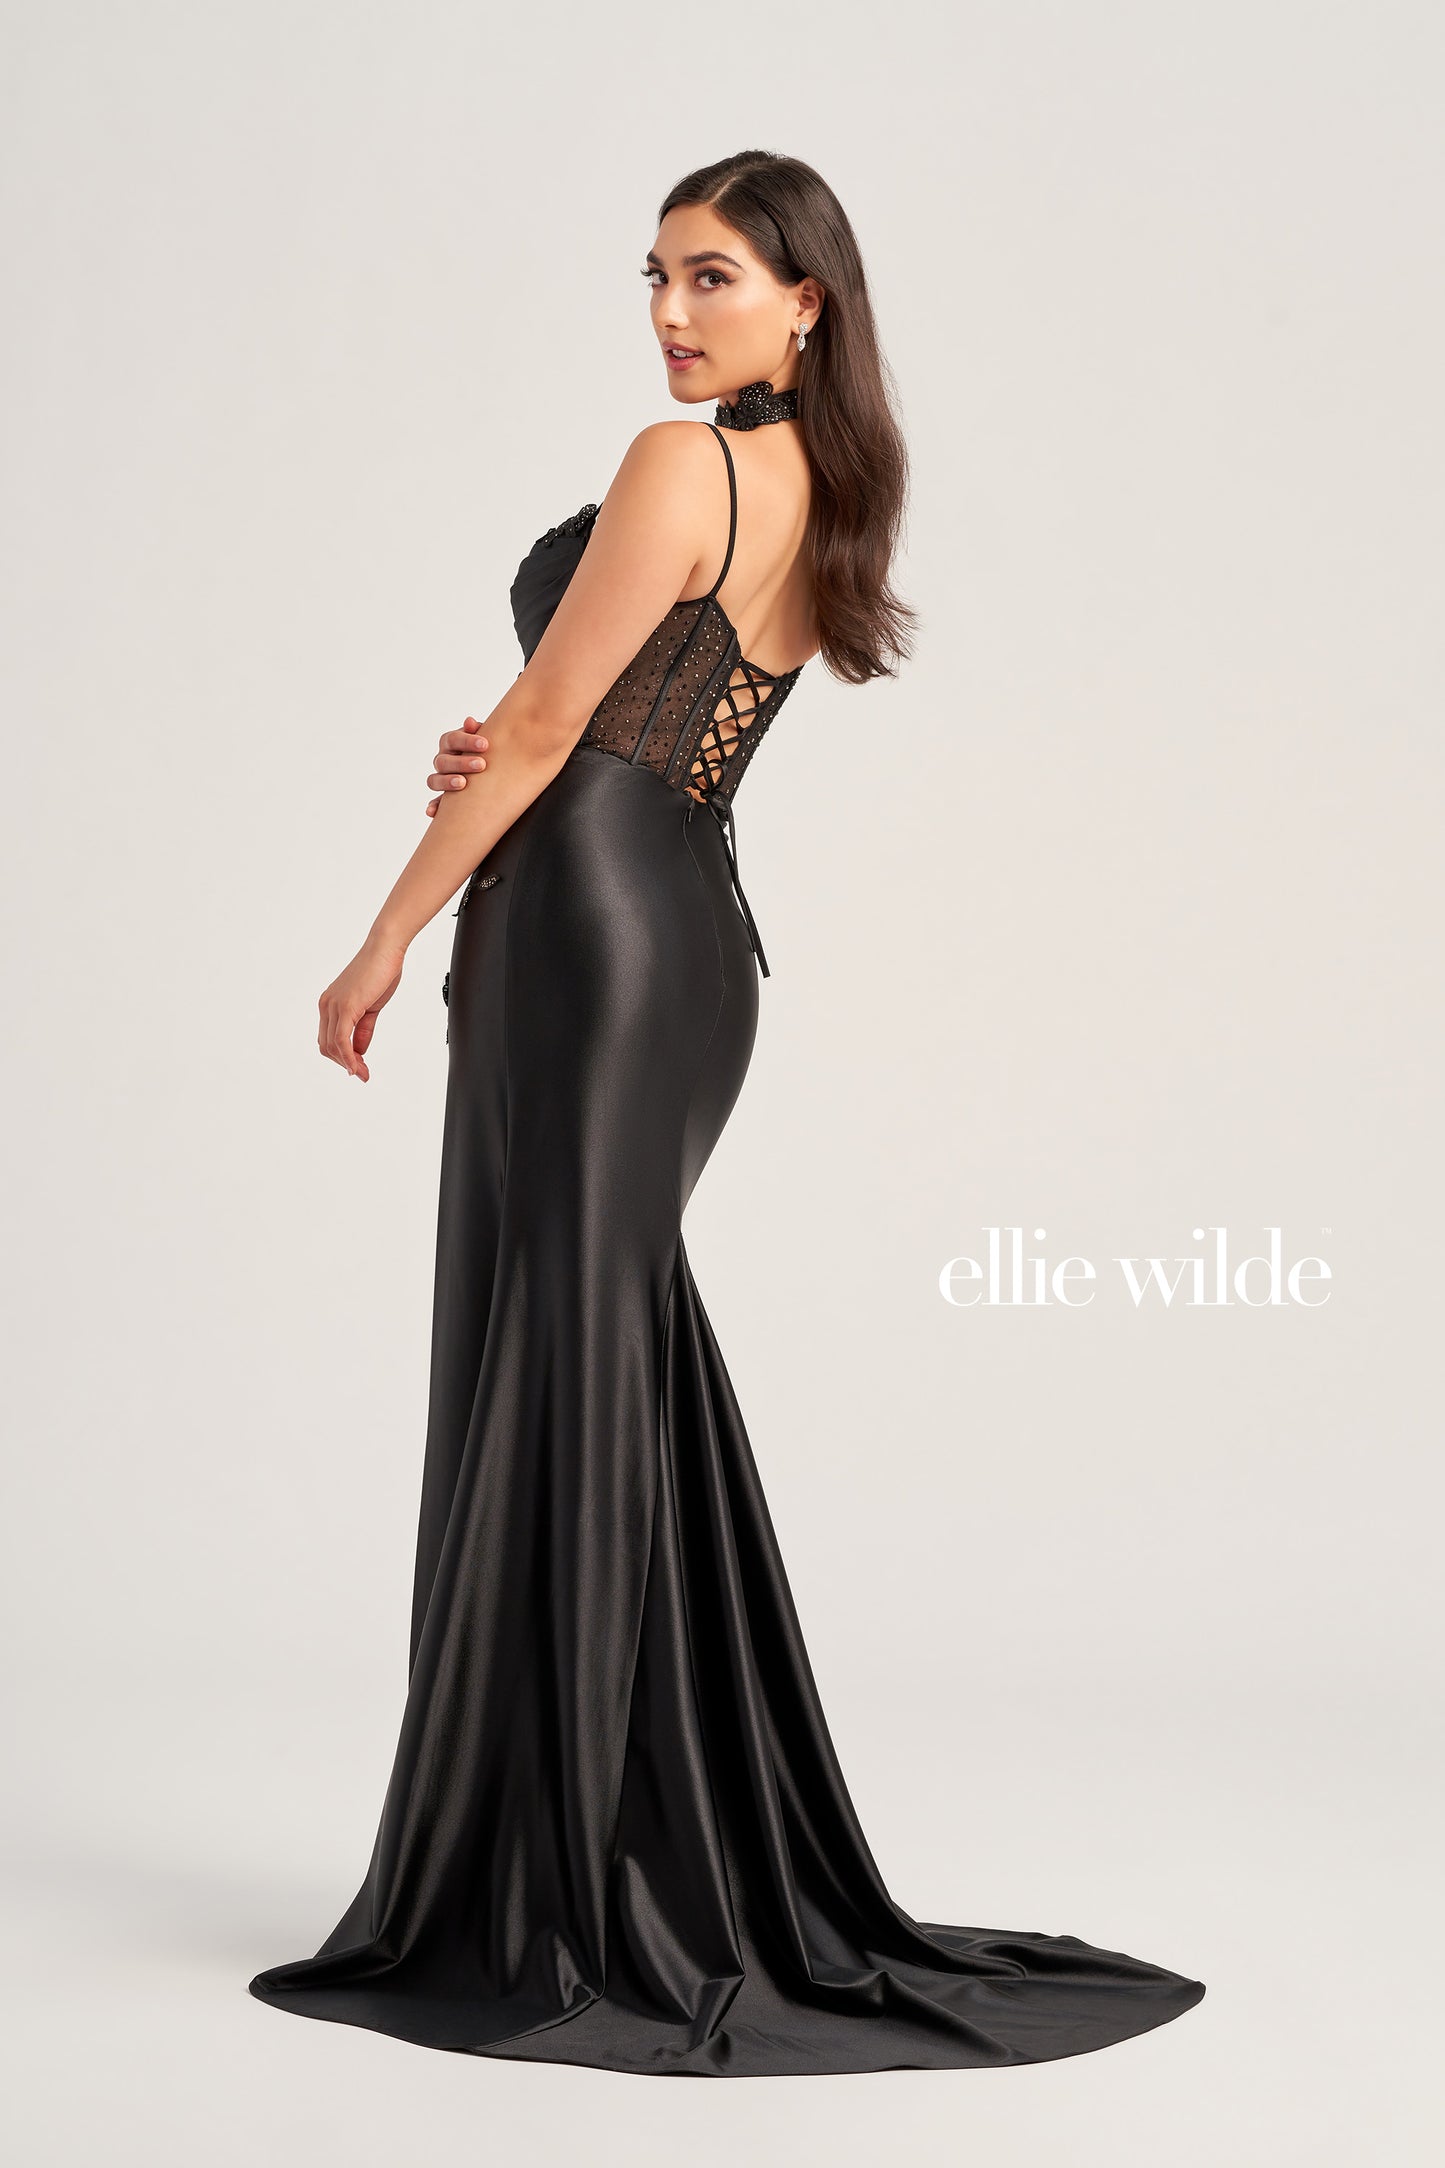 Look and feel your best in the Ellie Wilde EW35028 Long Sheer Corset Lace Formal Dress. This ultra-flattering evening gown features an alluring sweetheart neckline with lace choker detail, corset bodice, and a fit and flare silhouette, enhanced by lace appliques and stone accents. The luxe stretch satin jersey drapes effortlessly and the high slit adds movement and depth. Dazzle them with your entrancing look and effortless style.  COLOR: BLACK, RED, EMERALD, DARK PURPLE SIZE: 00 - 20